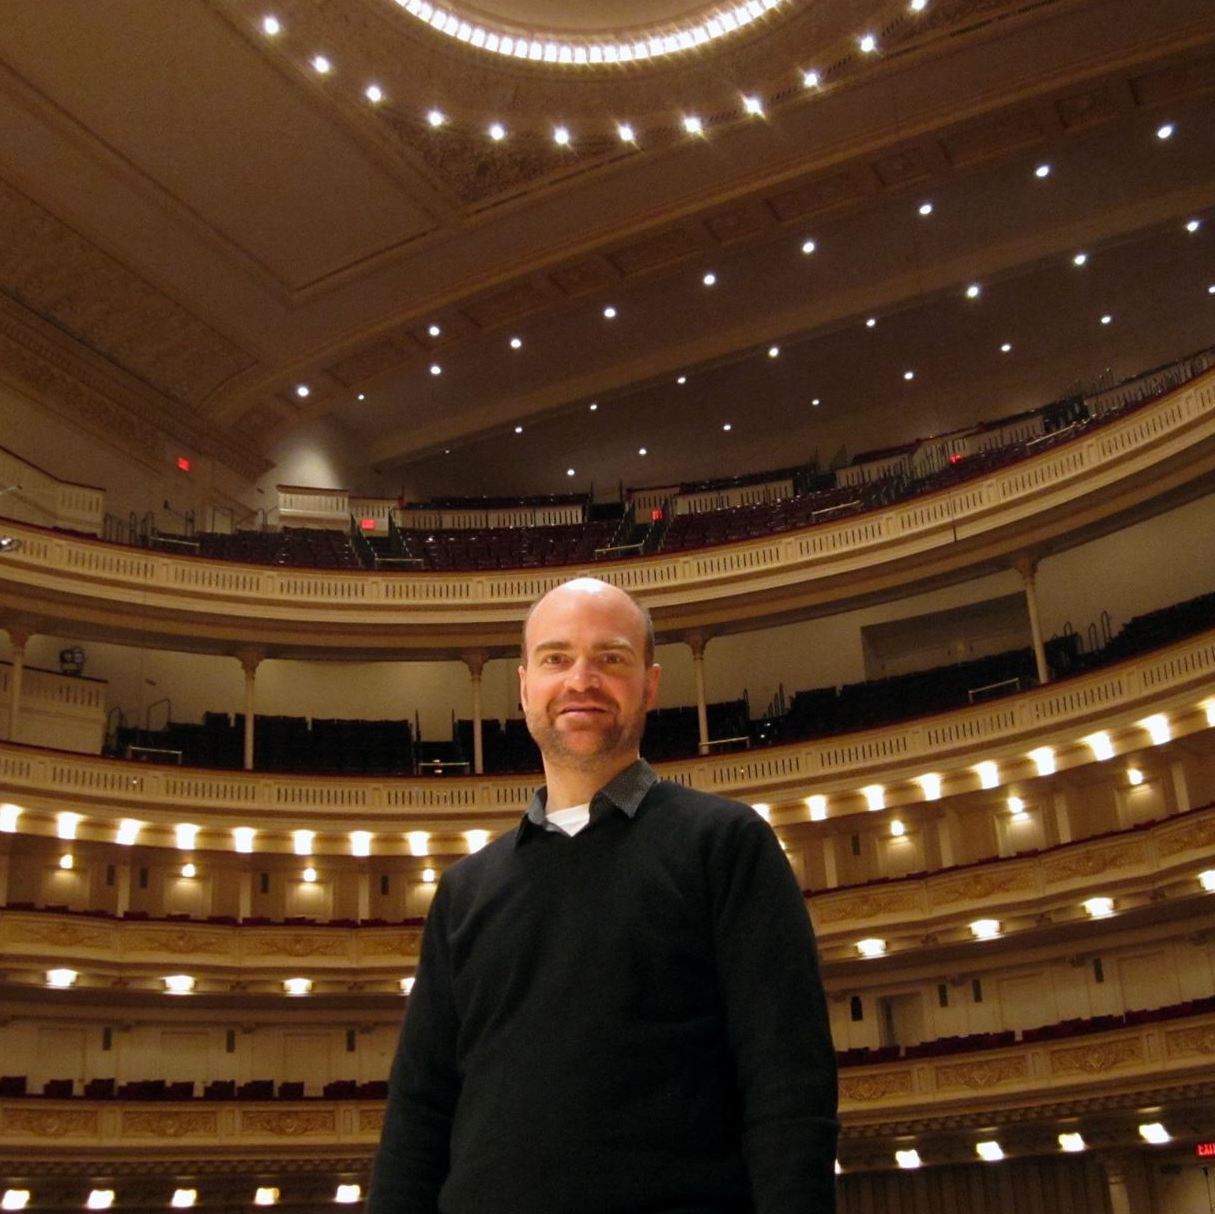 Rob Hudson standing in a concert hall